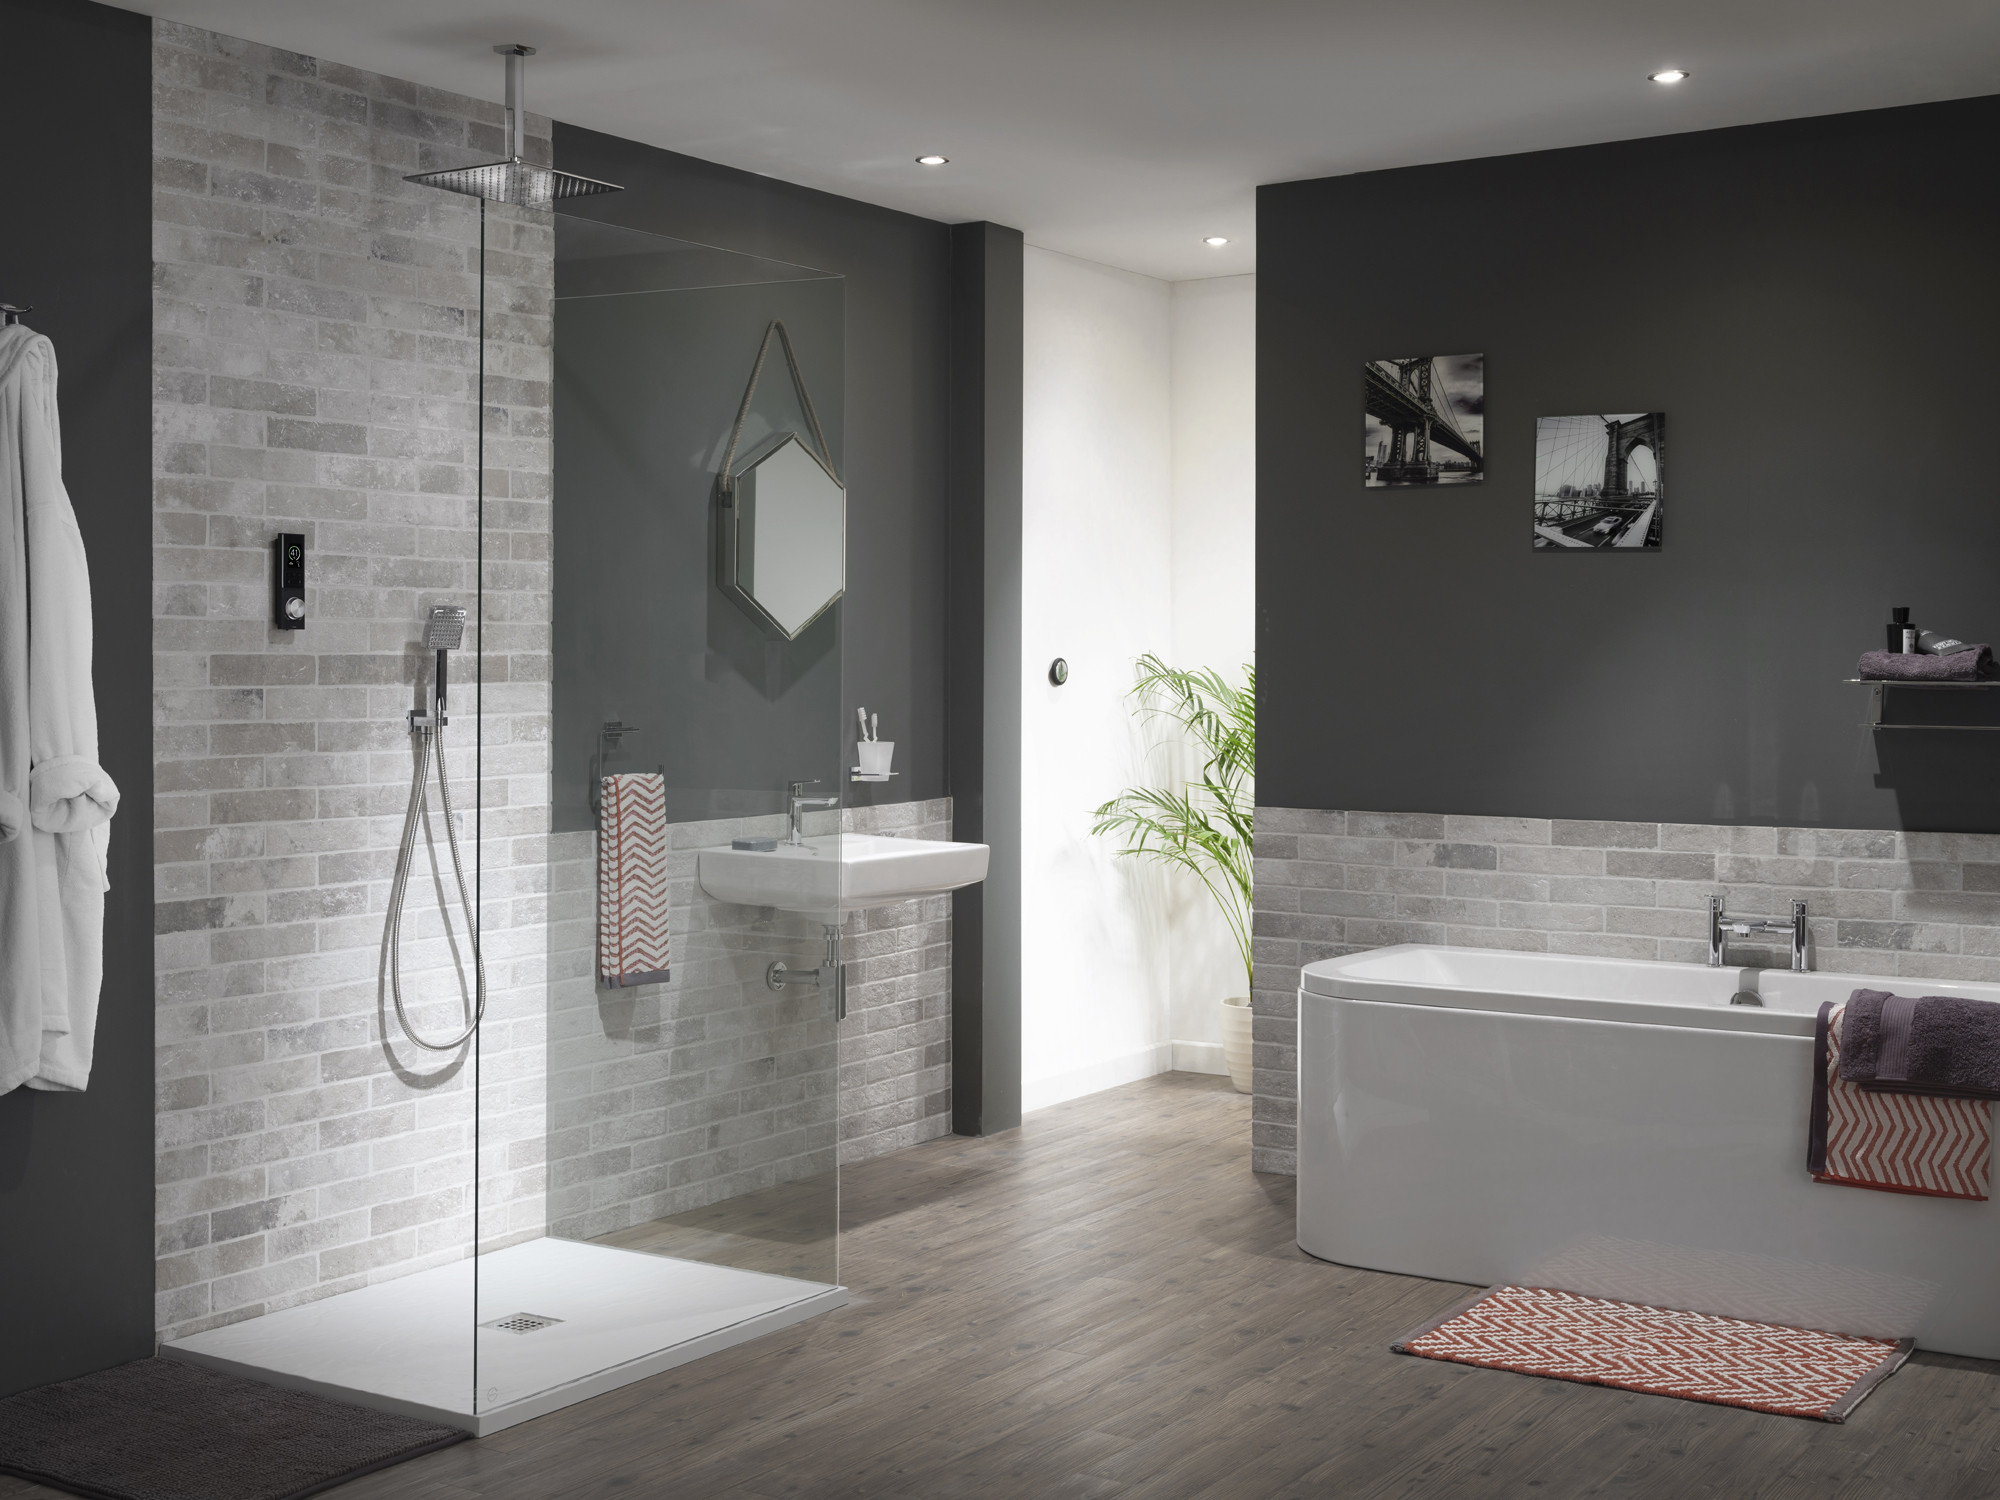 Latest Bathroom Design
 Using the latest shower trends to create stand out bathrooms